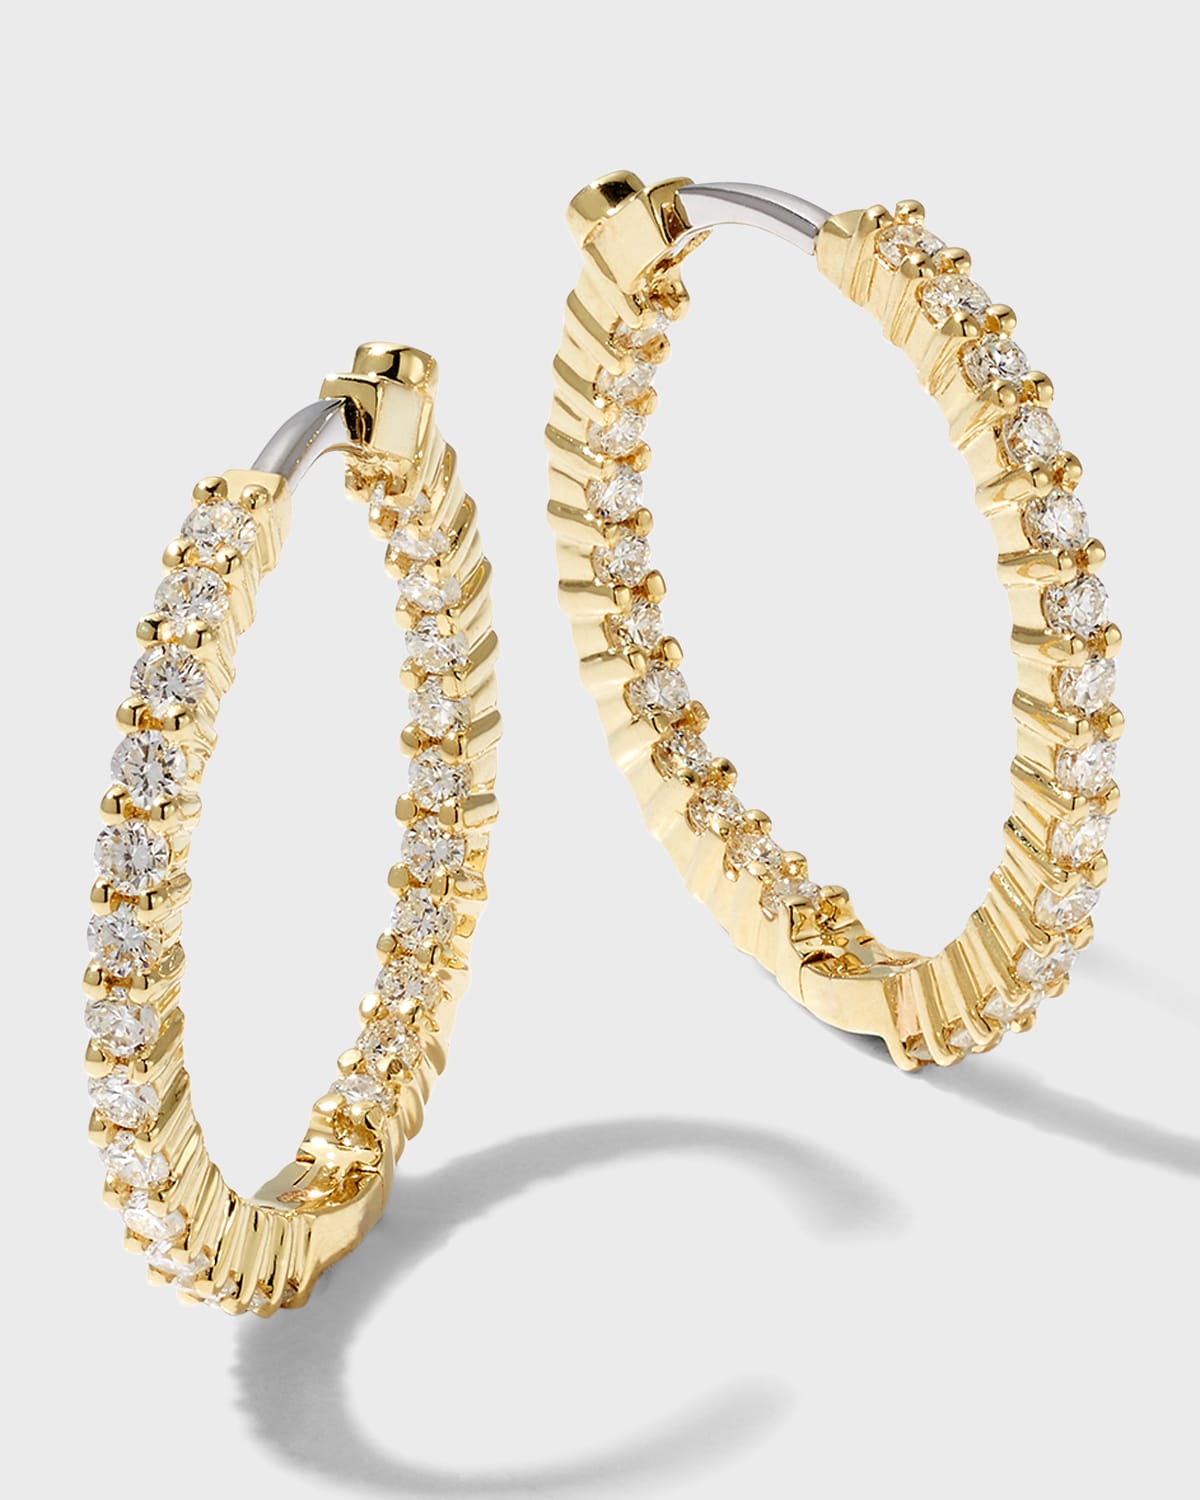 Gold hoop earrings 9 carat yellow gold floral 